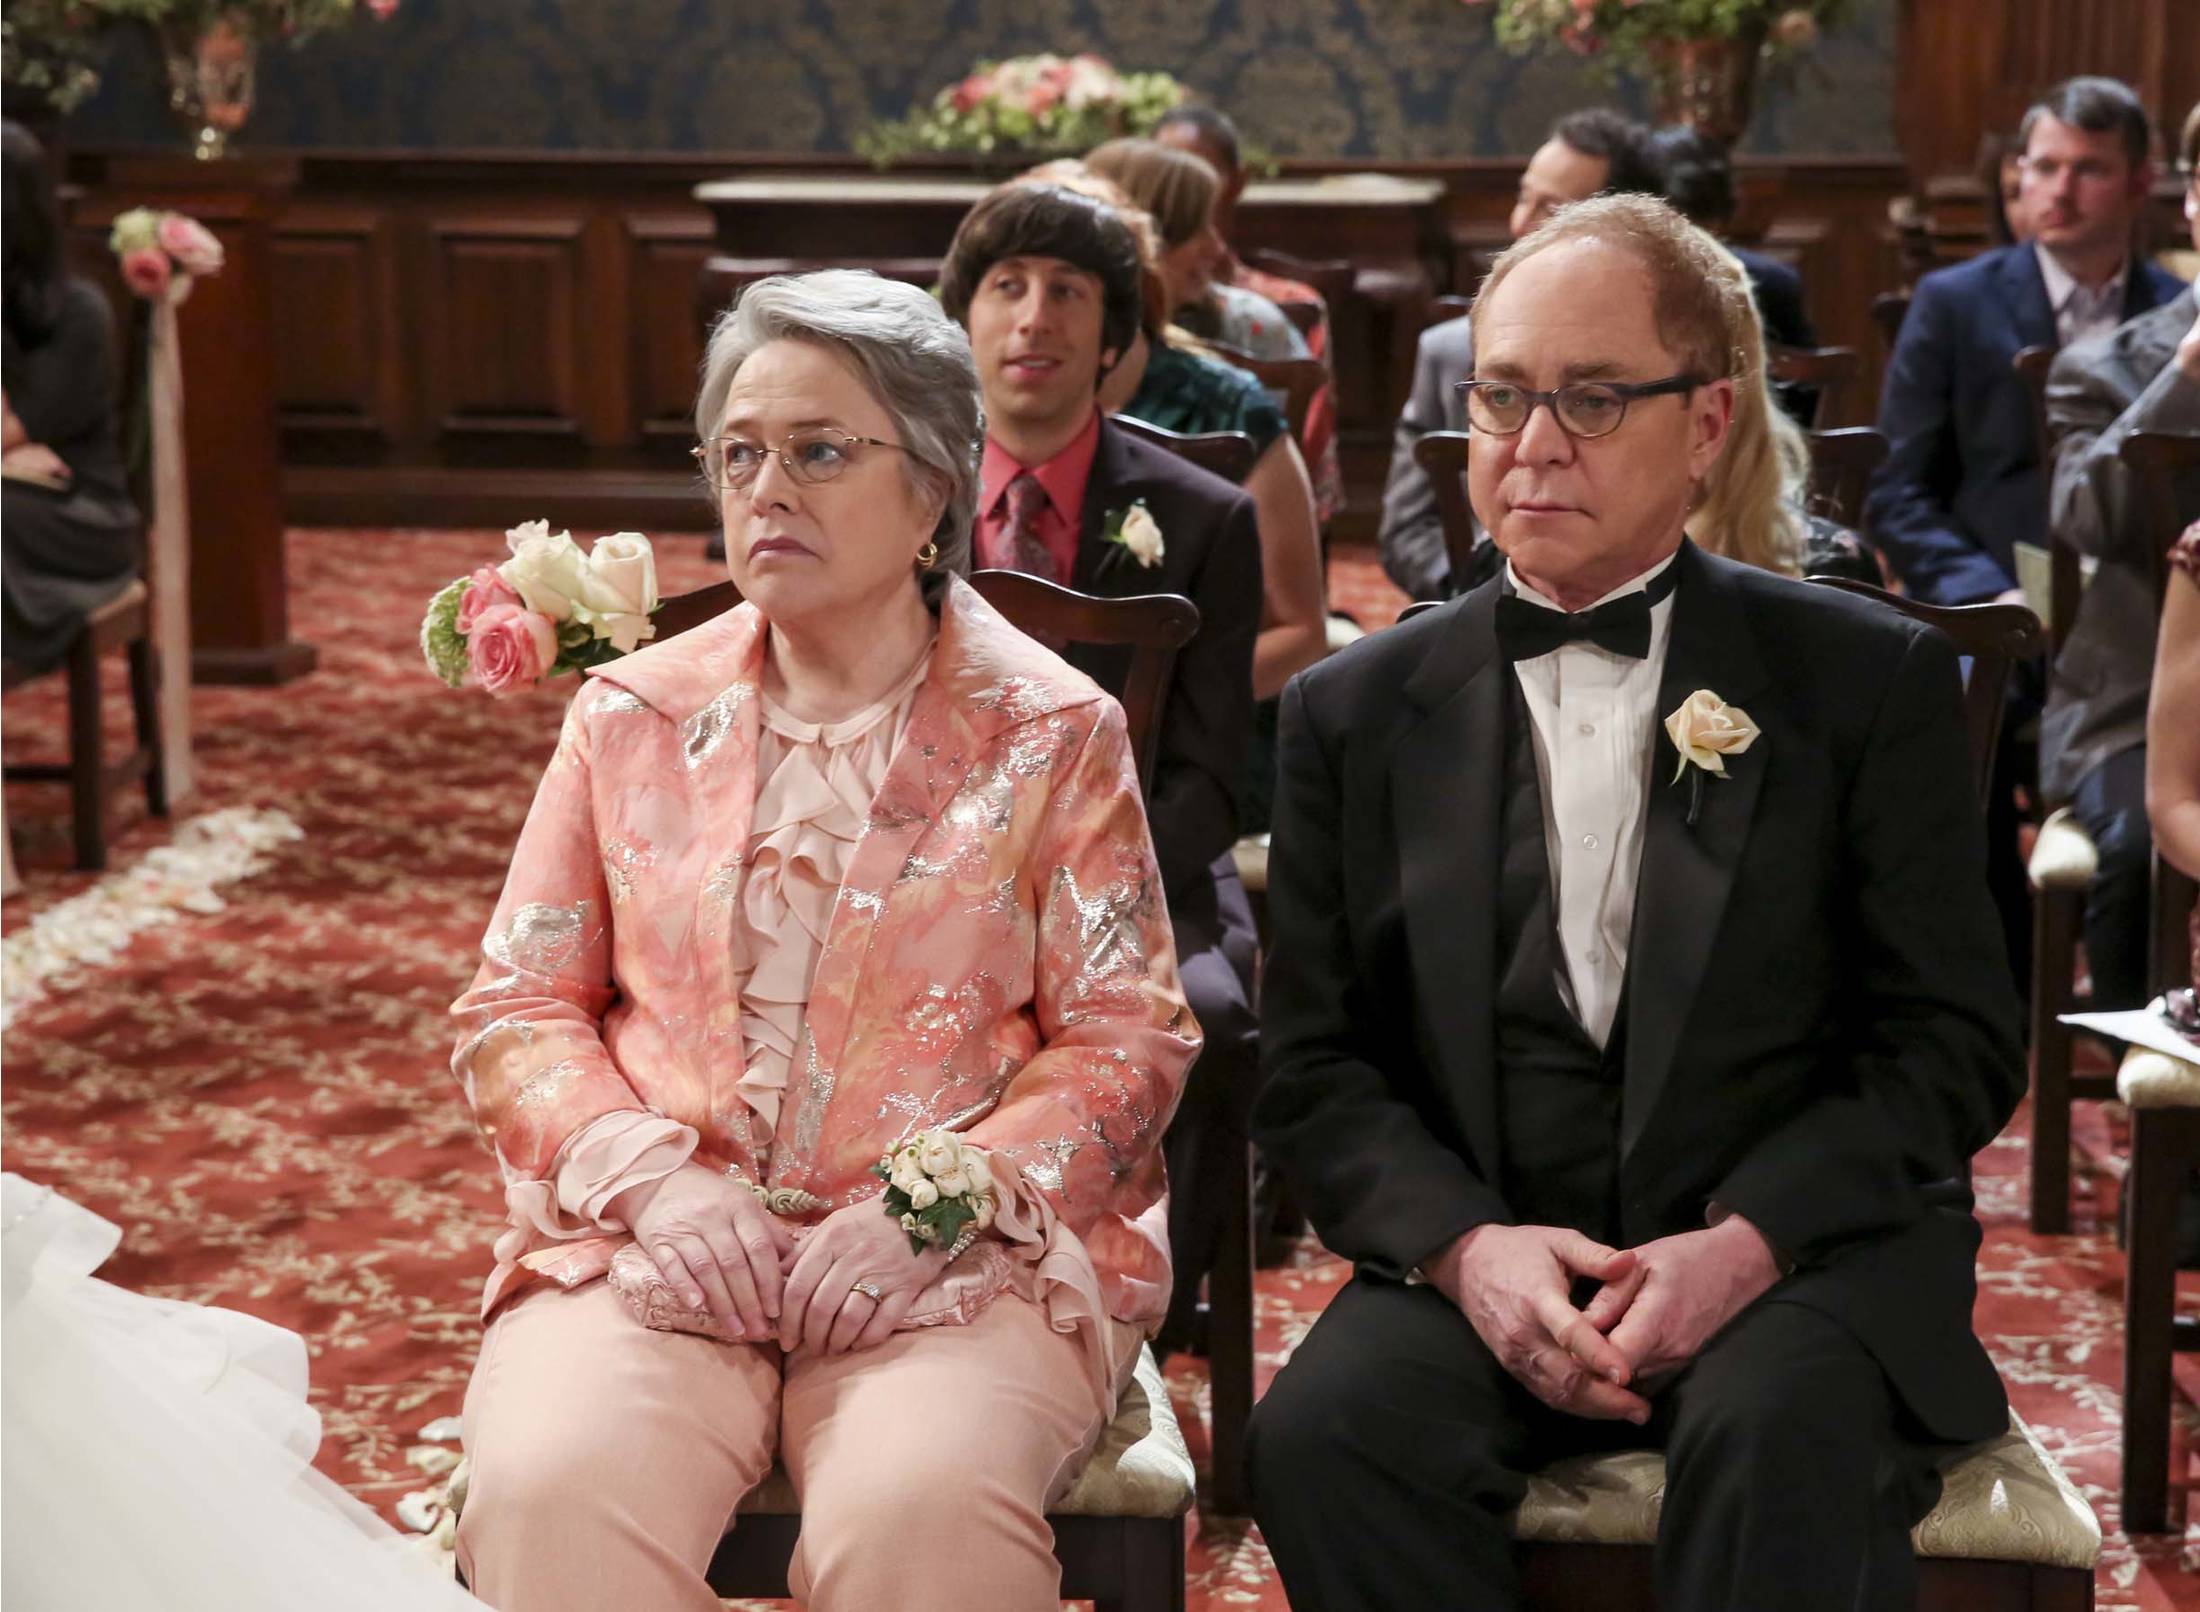 "The Bow Tie Asymmetry" - Pictured: Mrs. Fowler (Kathy Bates) and Mr. Fowler (Teller). When Amy's parents and Sheldon's family arrive for the wedding, everybody is focused on making sure all goes according to plan -- everyone except the bride and groom, on the 11th season finale of THE BIG BANG THEORY, Thursday, May 10 (8:00-8:31 PM, ET/PT) on the CBS Television Network. Photo: Michael Yarish/CBS ÃÂ©2018 CBS Broadcasting, Inc. All Rights Reserved.